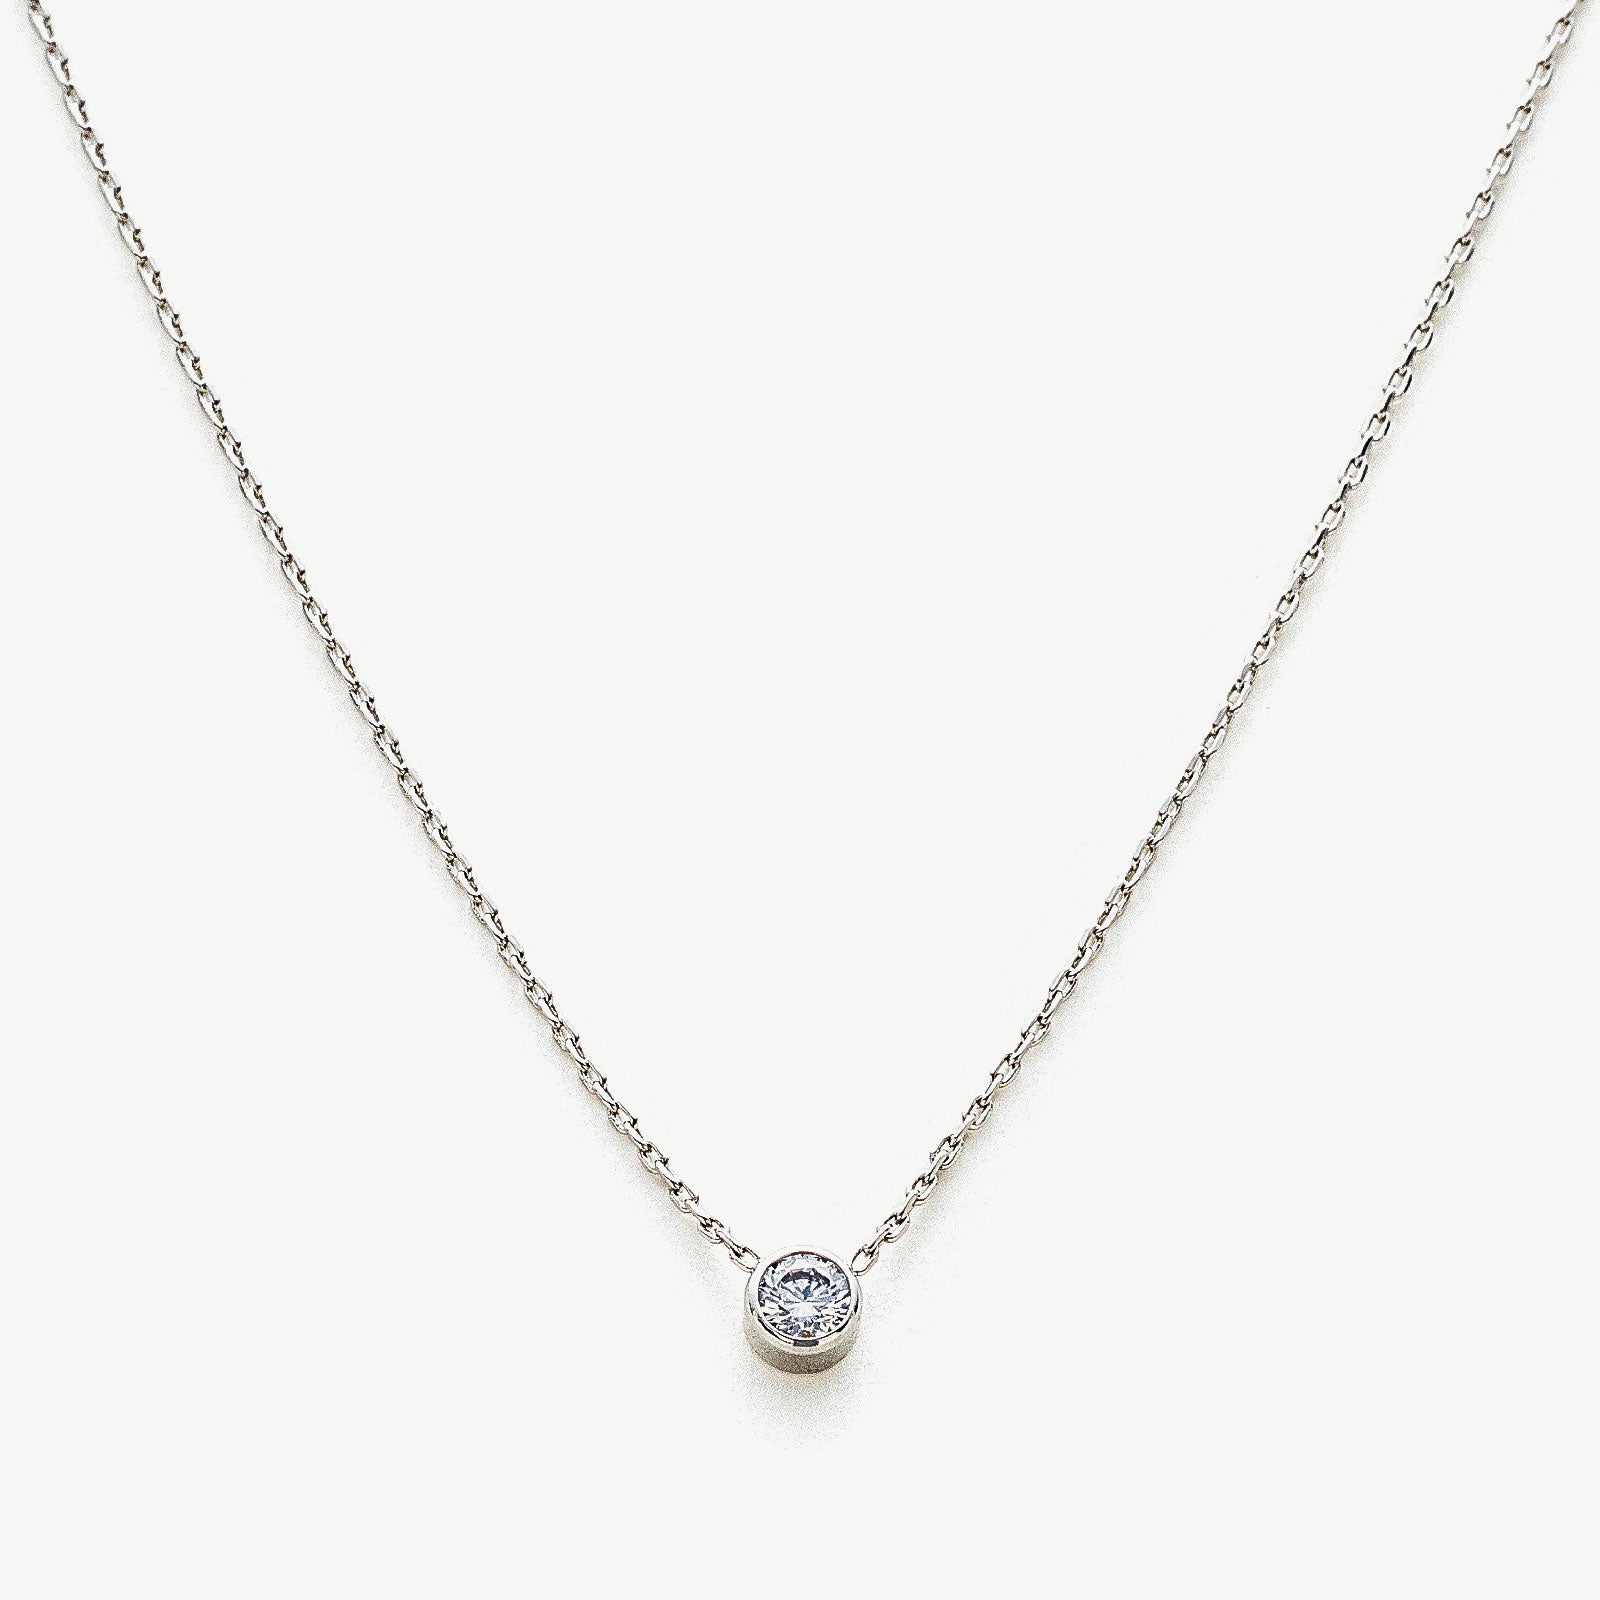 Platinum Crystal Pendant Necklace, unveiling the grace of platinum, this necklace features a mesmerizing crystal pendant in a rich platinum hue, creating a captivating and versatile accessory